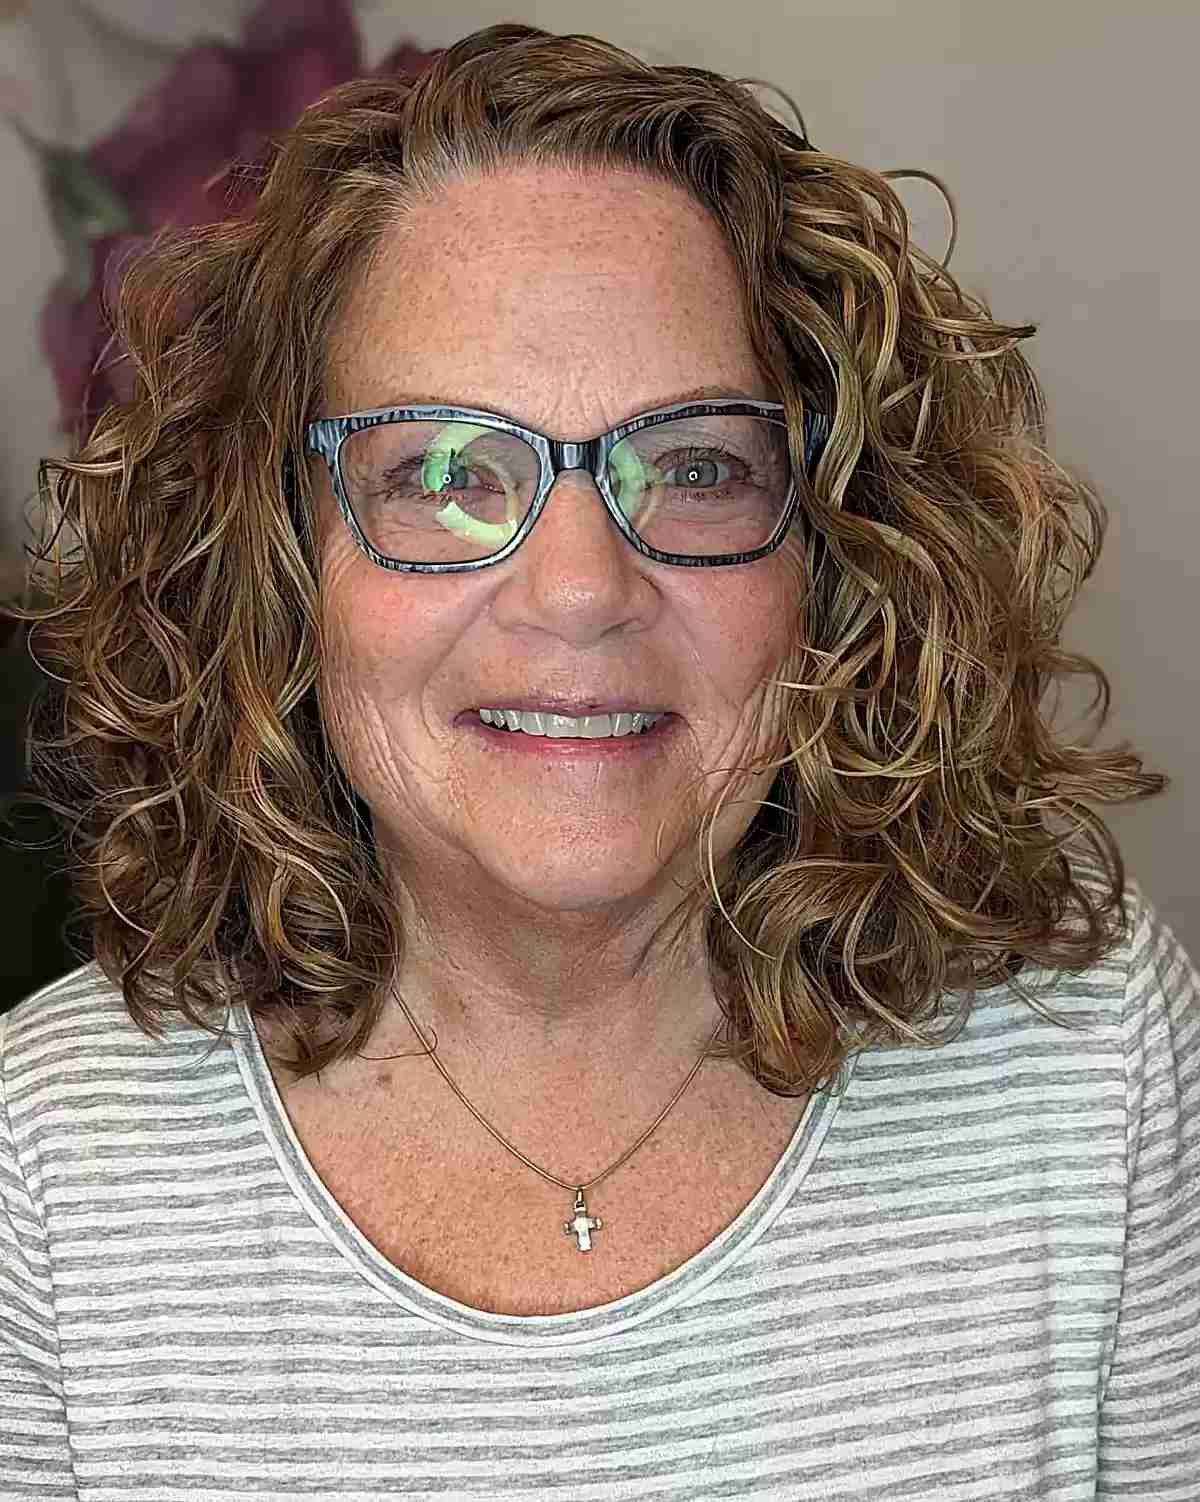 Defined Loose Curls for Women Over Sixty with Glasses